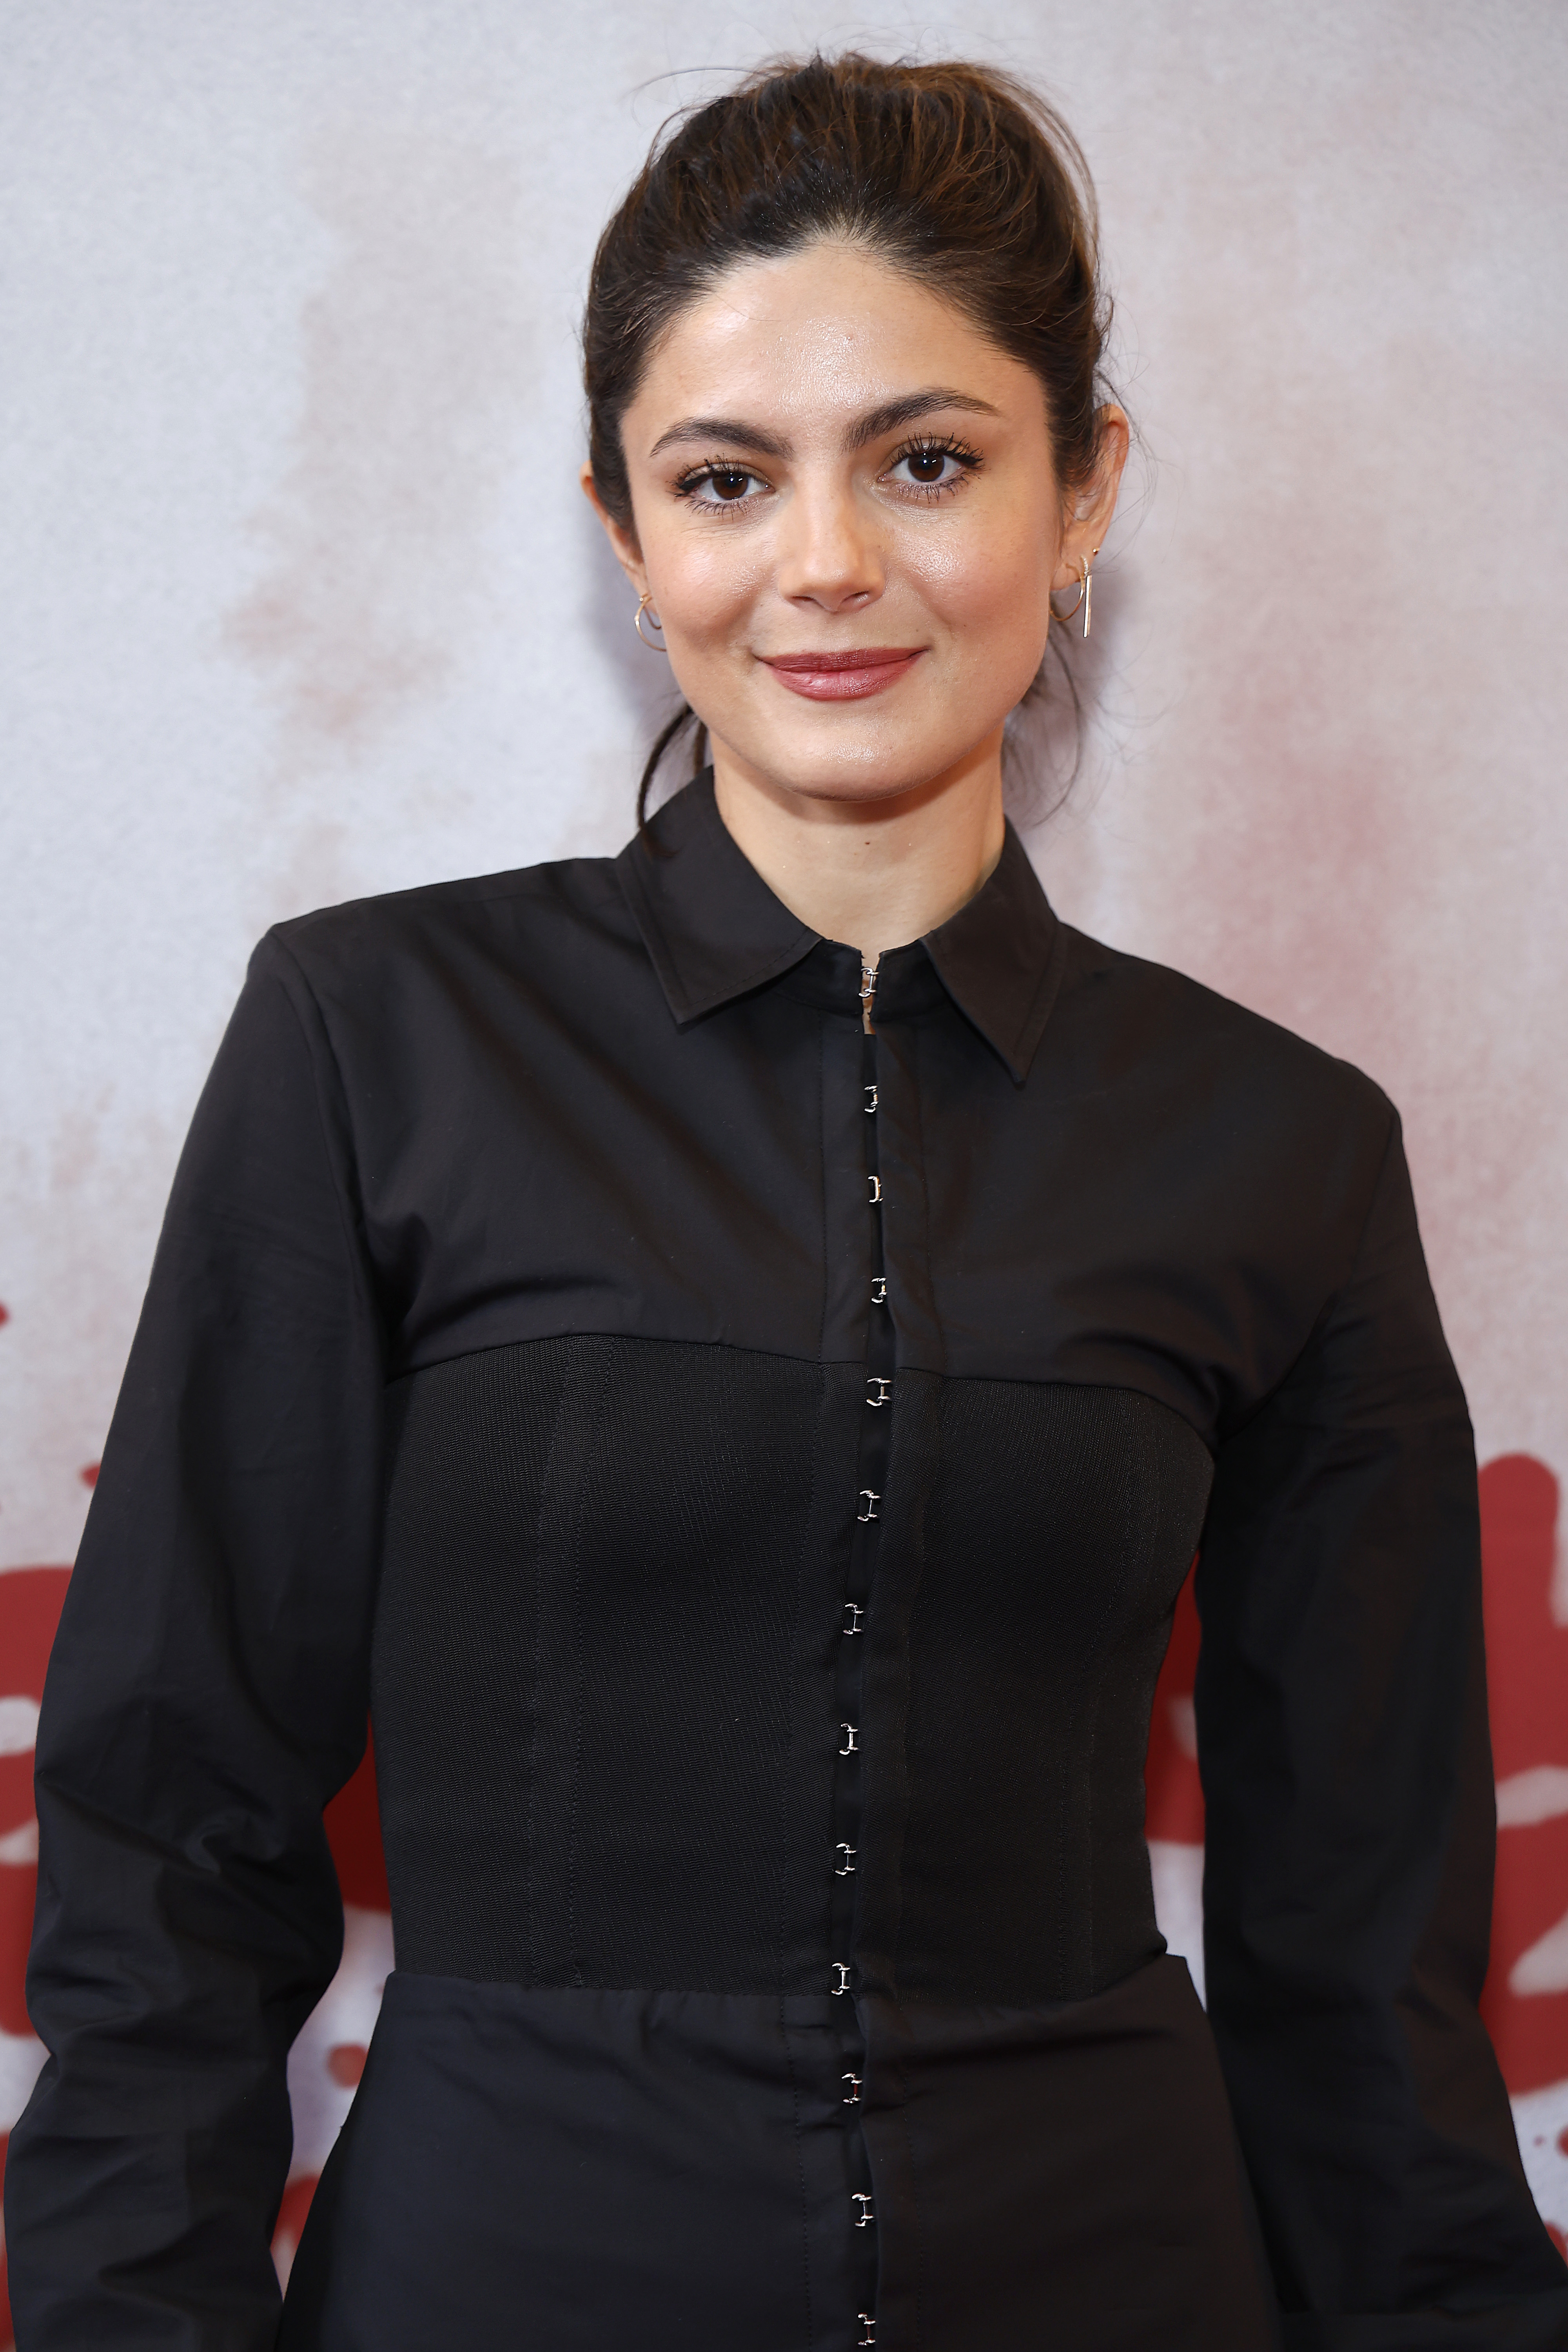 Monica Barbaro at the "Sweeney Todd: The Demon Barber Of Fleet Street" Broadway revival opening night on March 26, 2023, in New York City. | Source: Getty Images